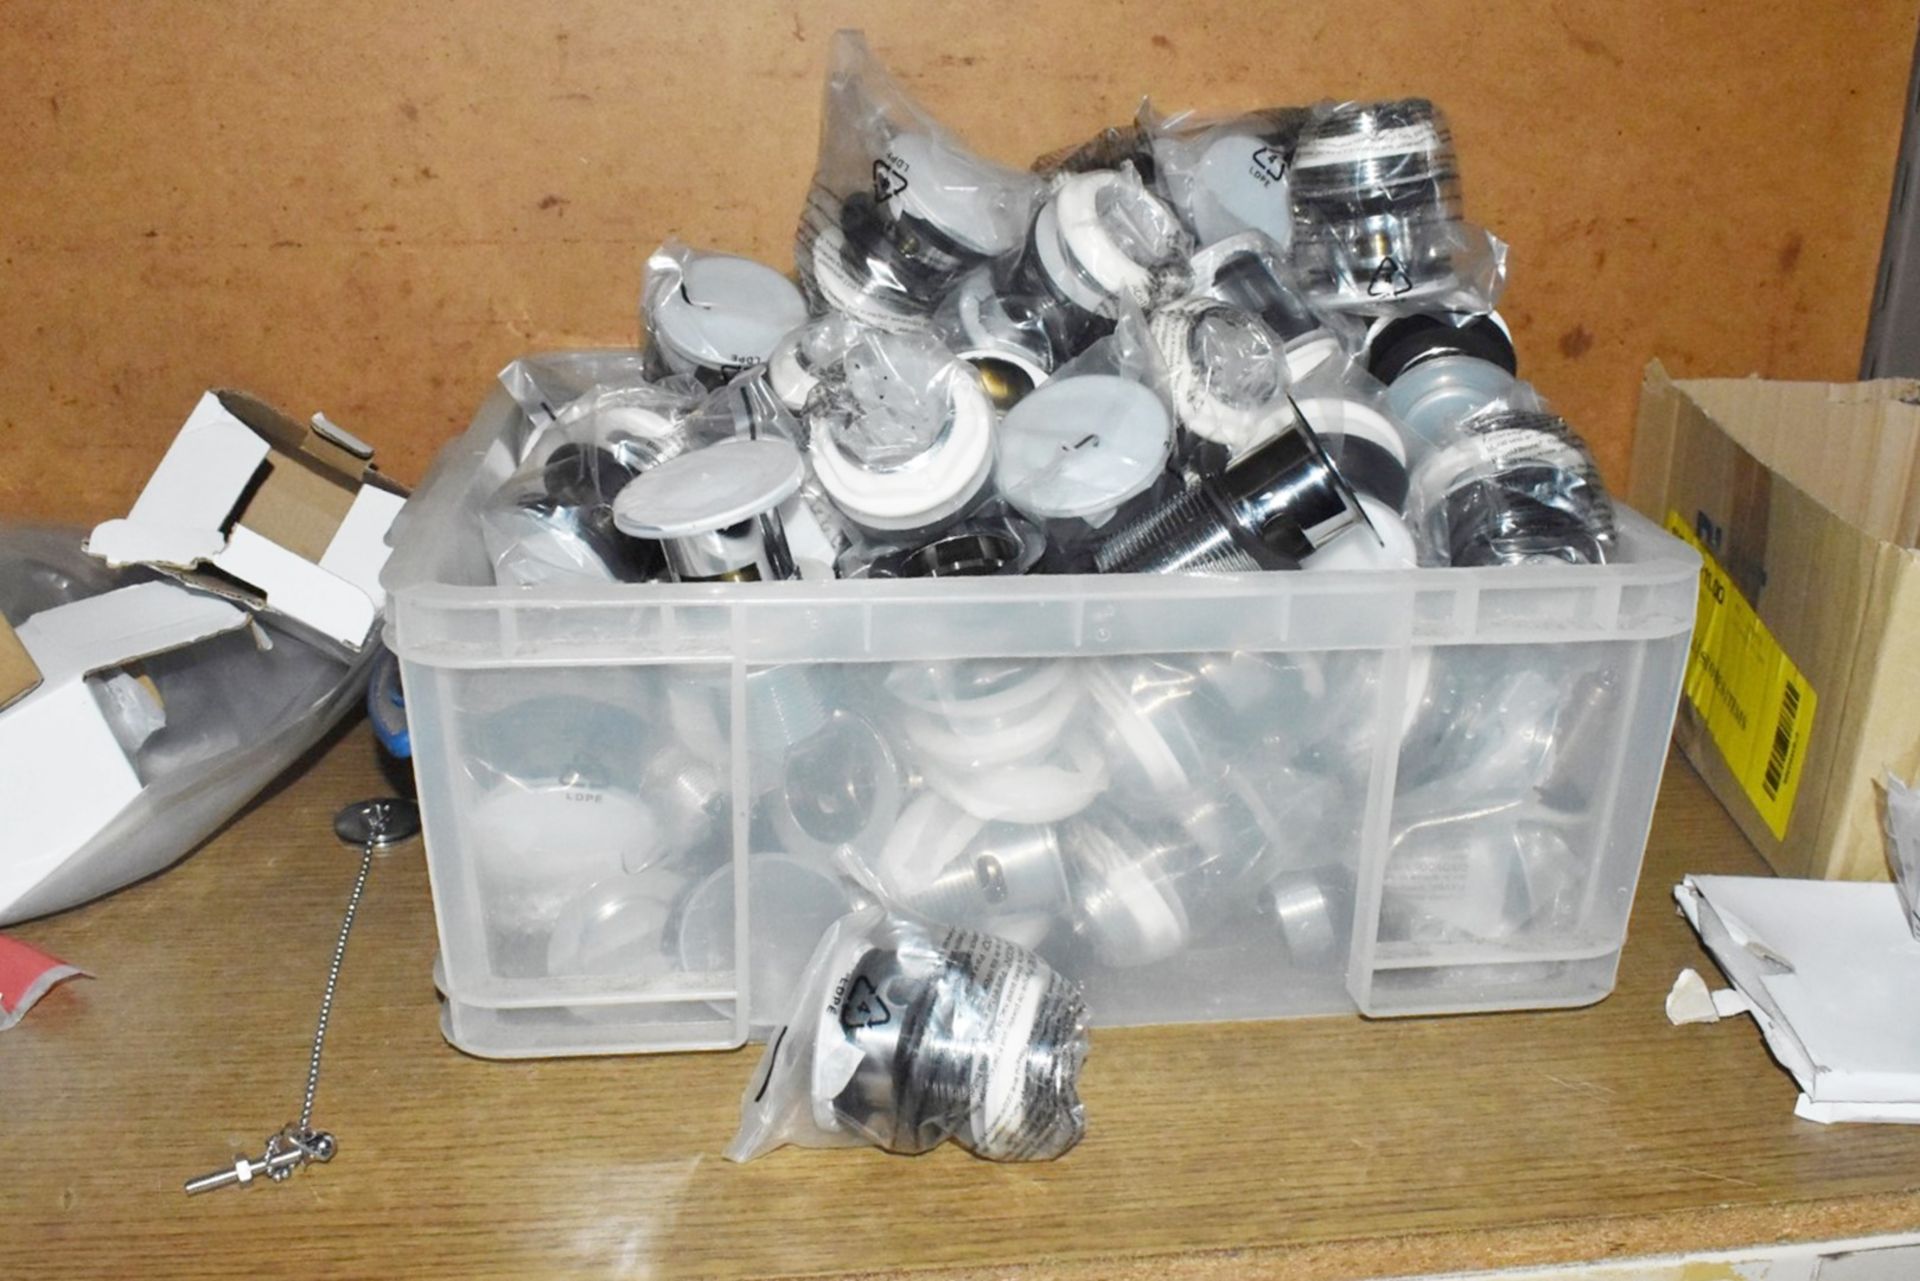 1 x Large Assorted Collection of Plumbing Parts, Bathroom Accessories, Wire Cages, Linbins and More - Image 189 of 217